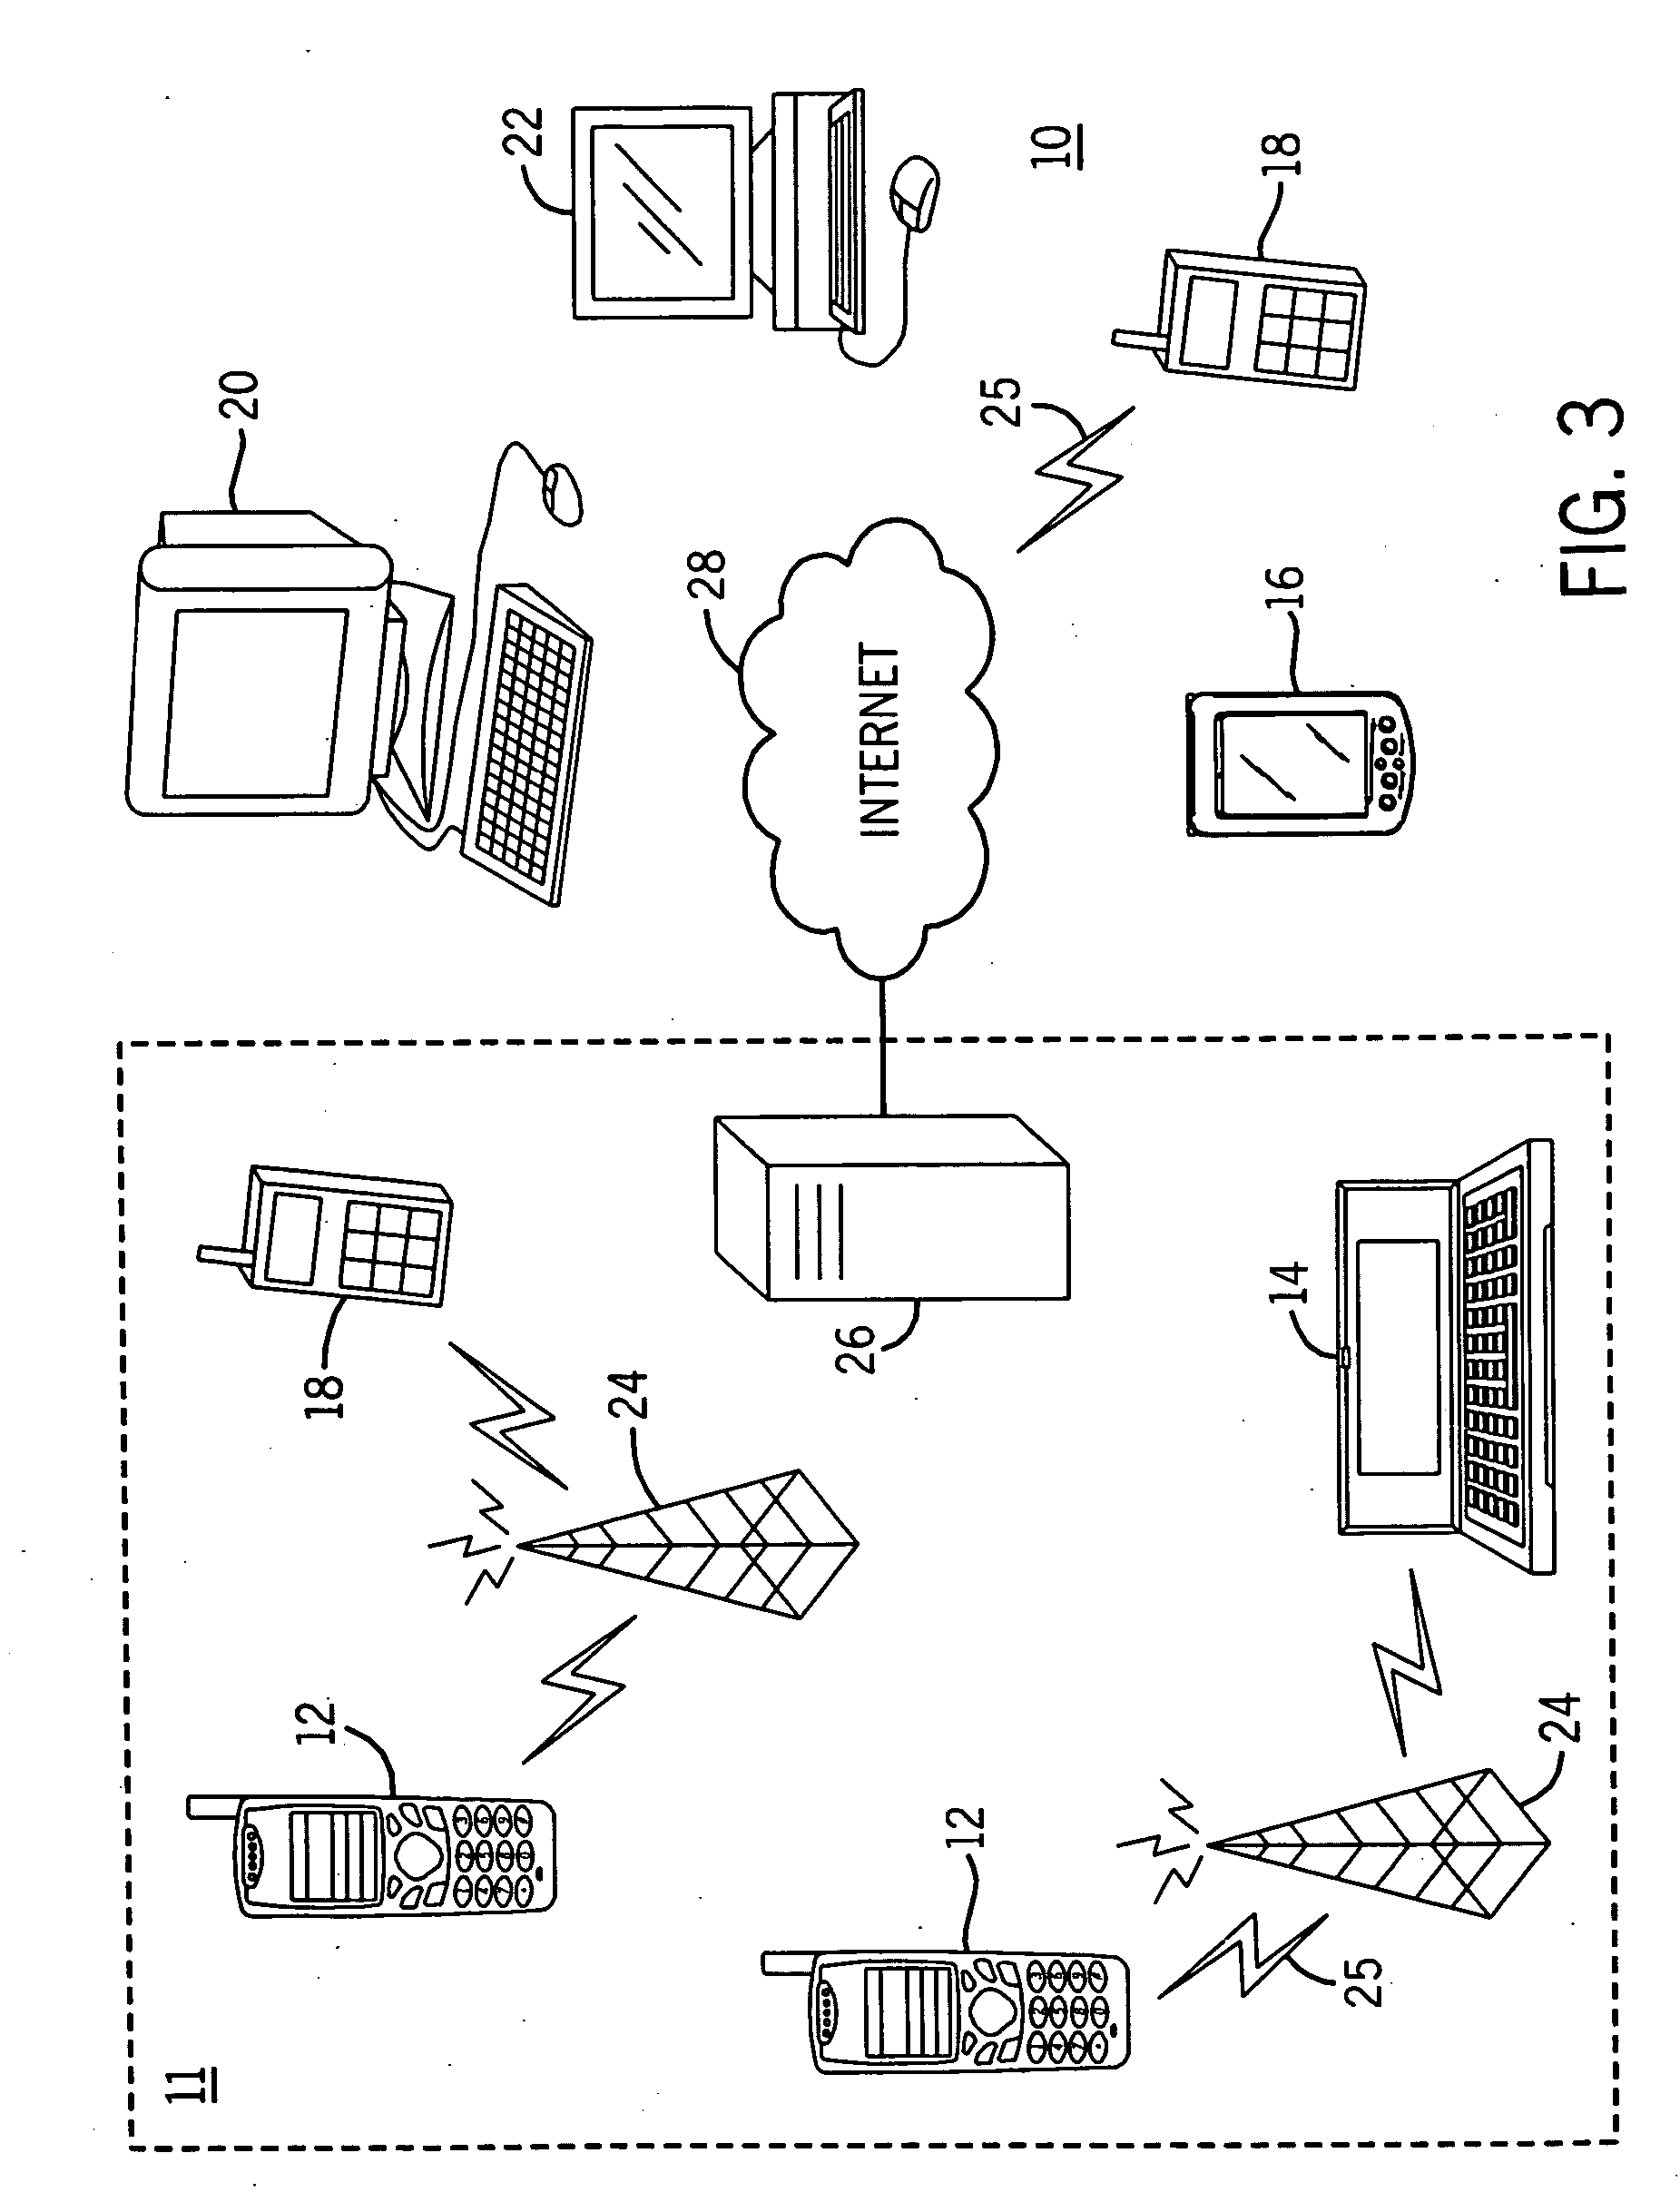 System and method for measuring confusion among words in an adaptive speech recognition system